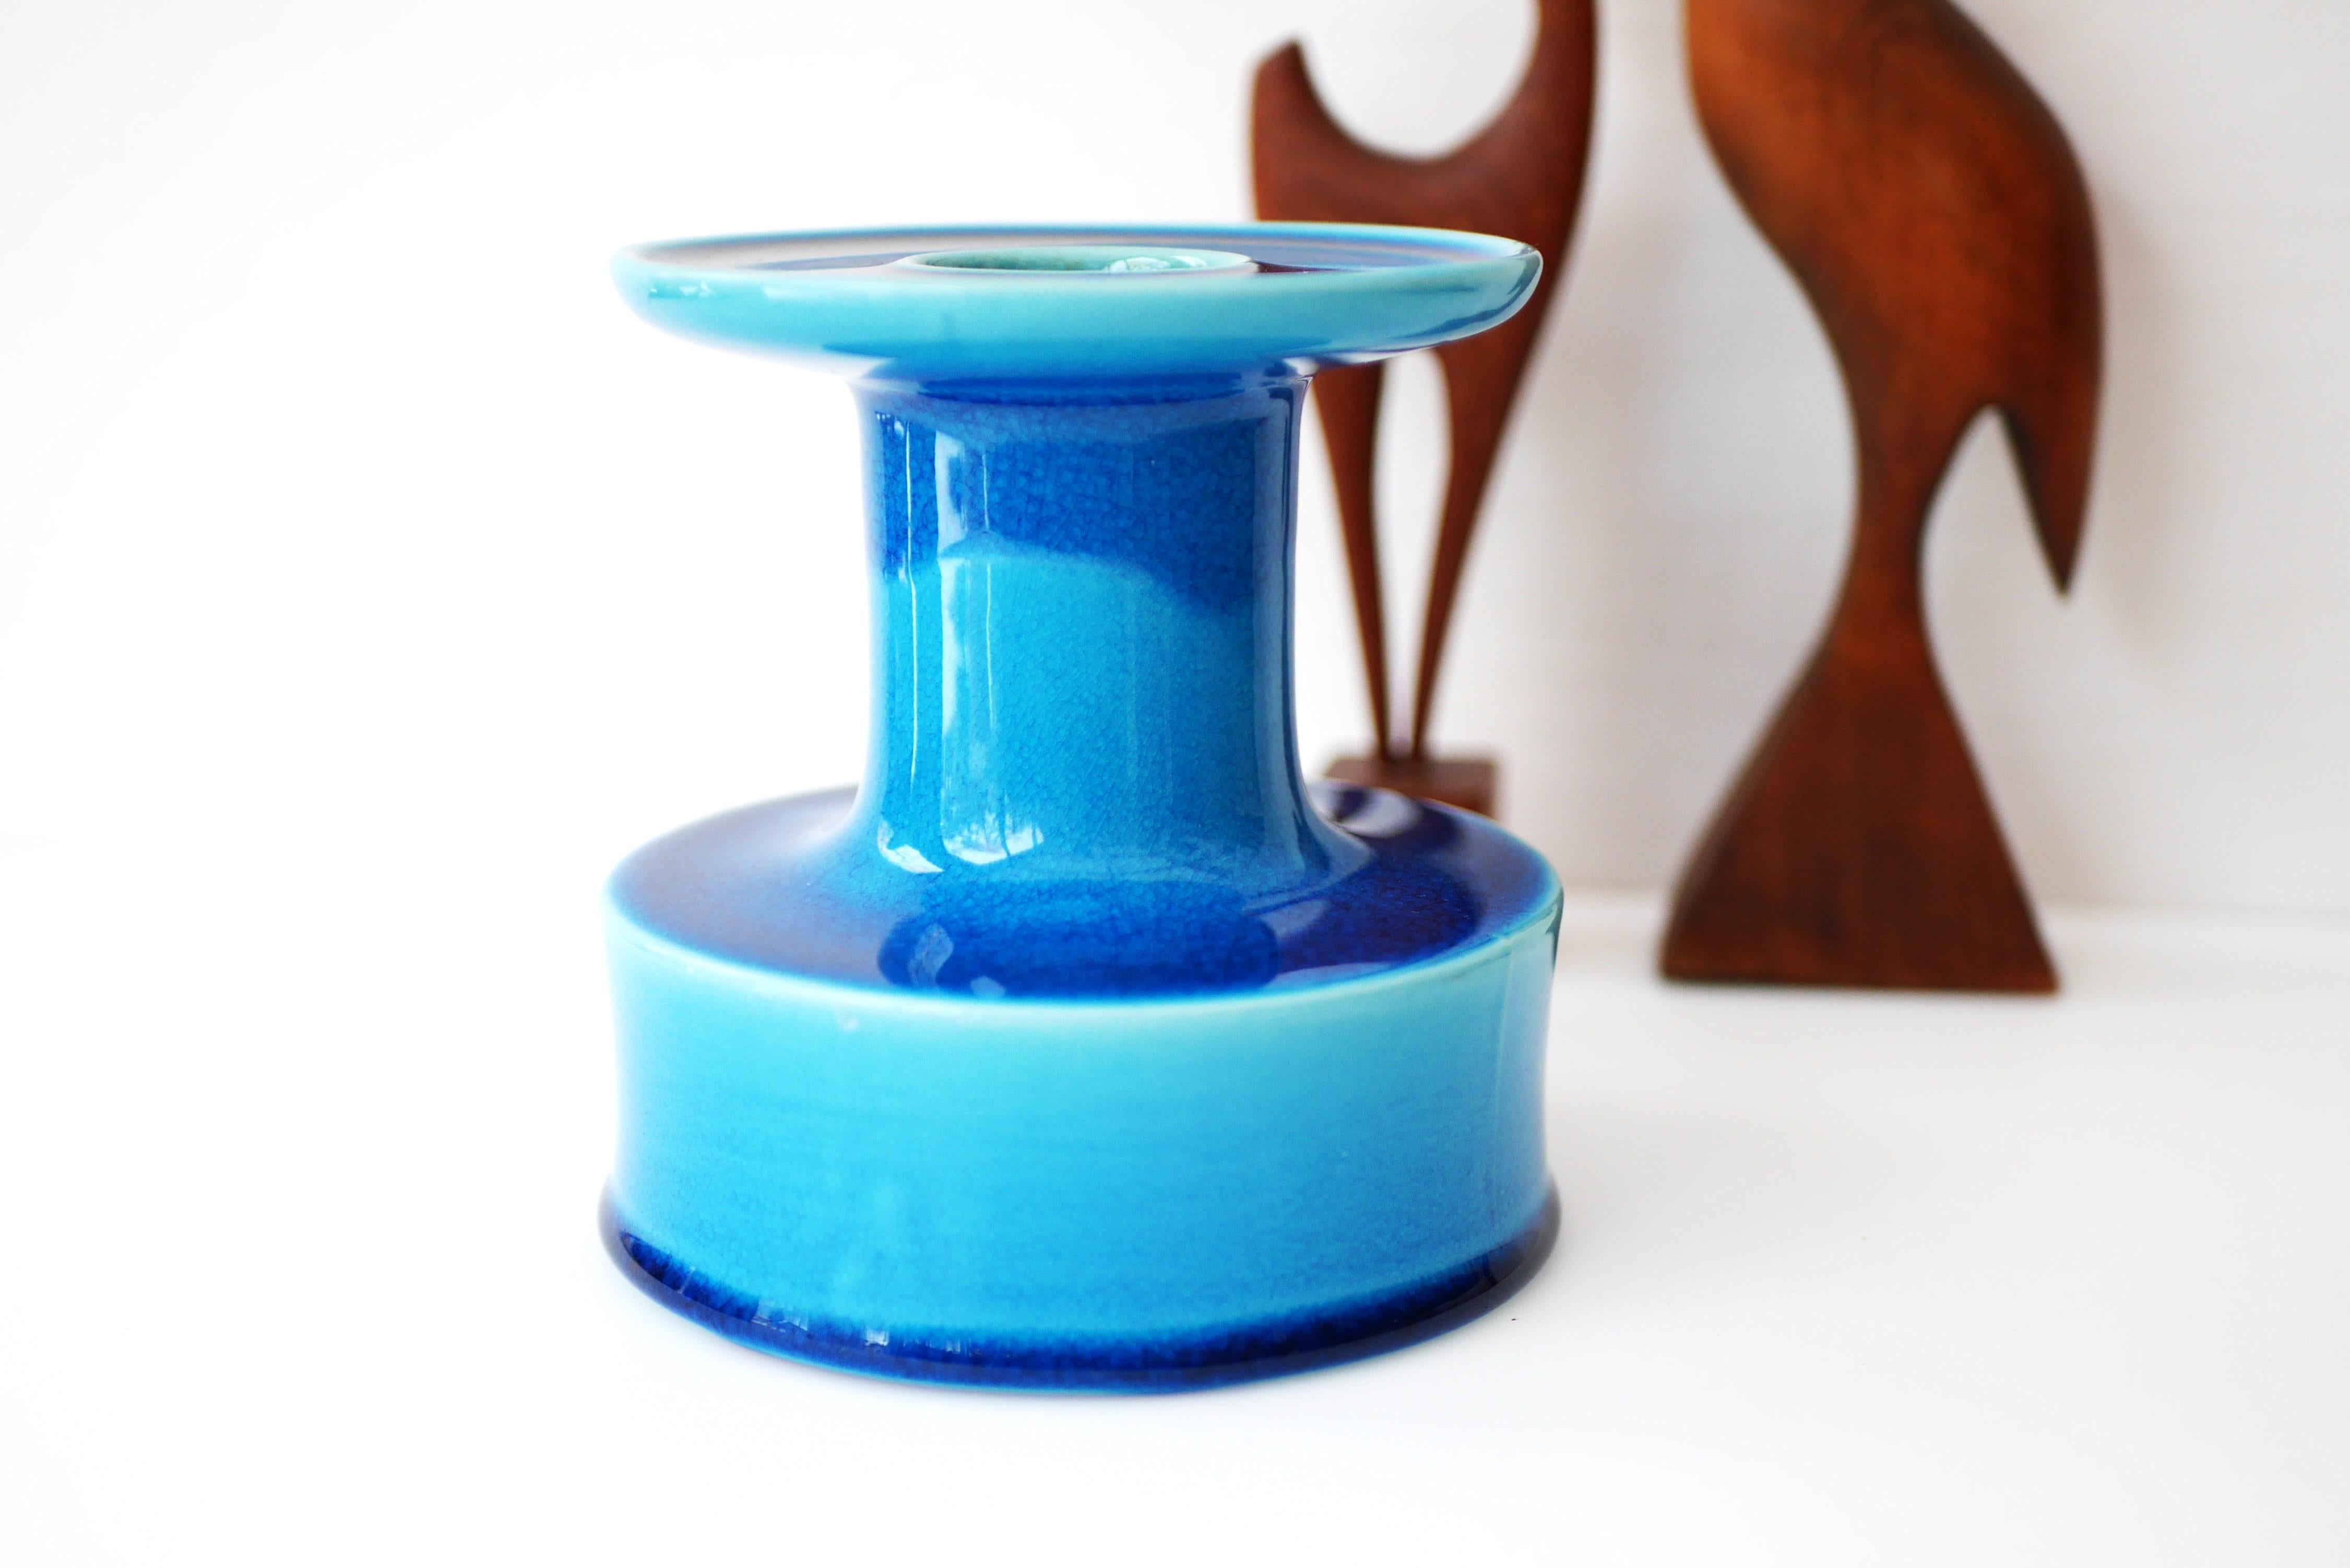 From the 'Lazur' series by Stig Lindberg for Gustavsberg. The bright blue glaze makes this piece really stand out and can be used both as a candlestick or a vase.

The history of Gustavsberg dates back to 1825. In 1826, the wholesaler Herman Öhman